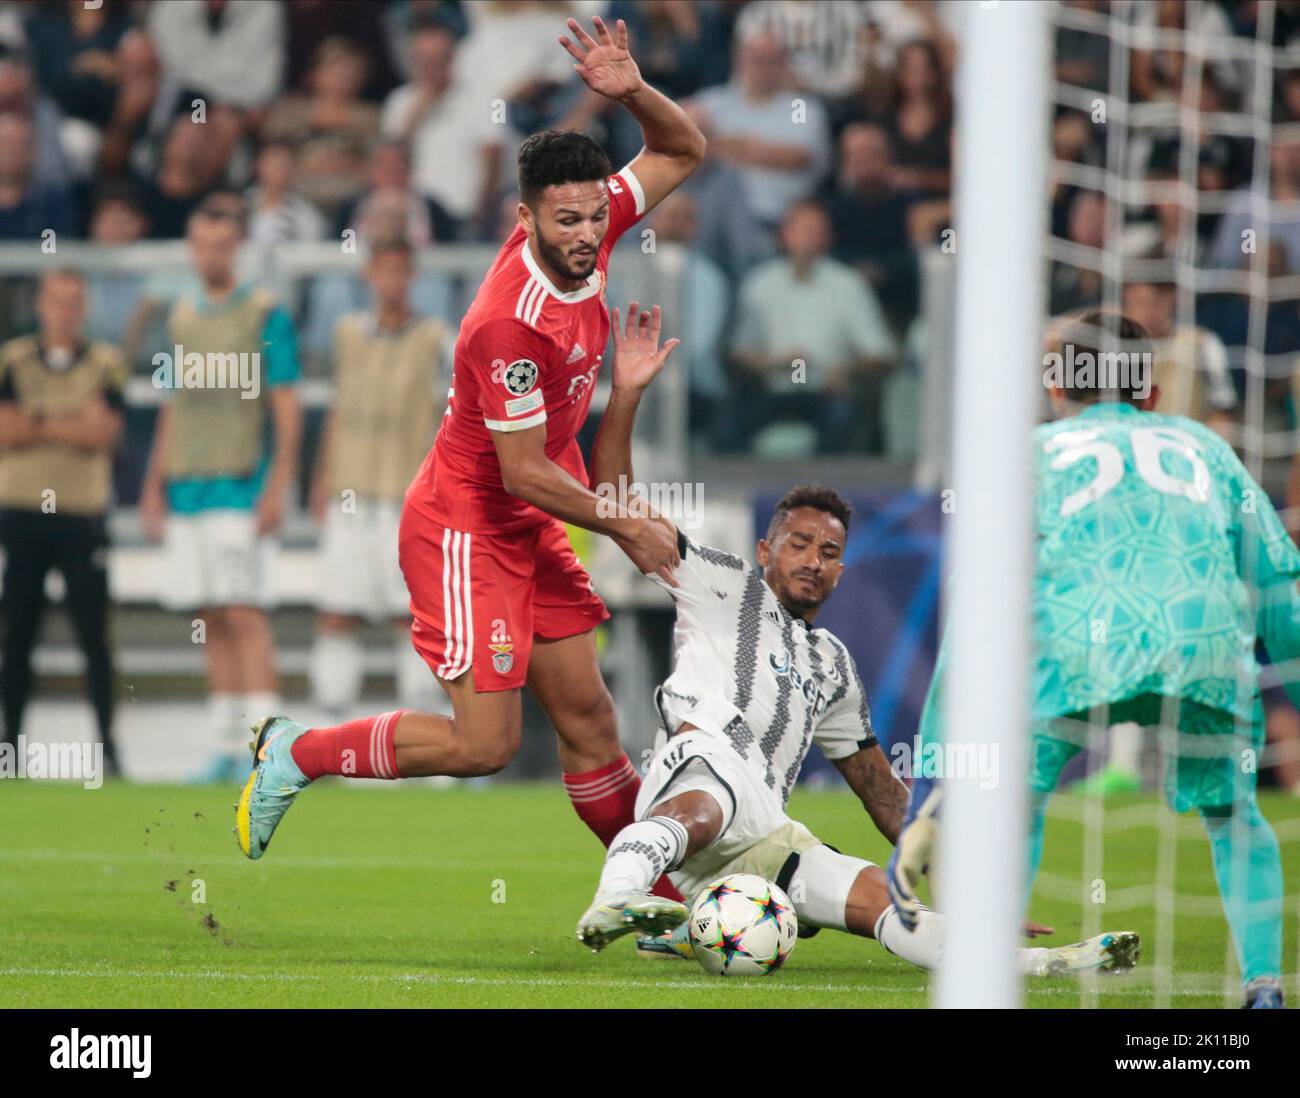 Turin, Italy. 14th Sep, 2022. Goncalo Ramos of Benfica and Luiz Da Silva Danilo of Juventus Fc during the UEFA Champions League, Group H, football match between Juventus Fc and Benfica, o 14 September 2022, at Allianz Stadium, Turin Italy. Photo Nderim Kaceli Credit: Independent Photo Agency/Alamy Live News Stock Photo